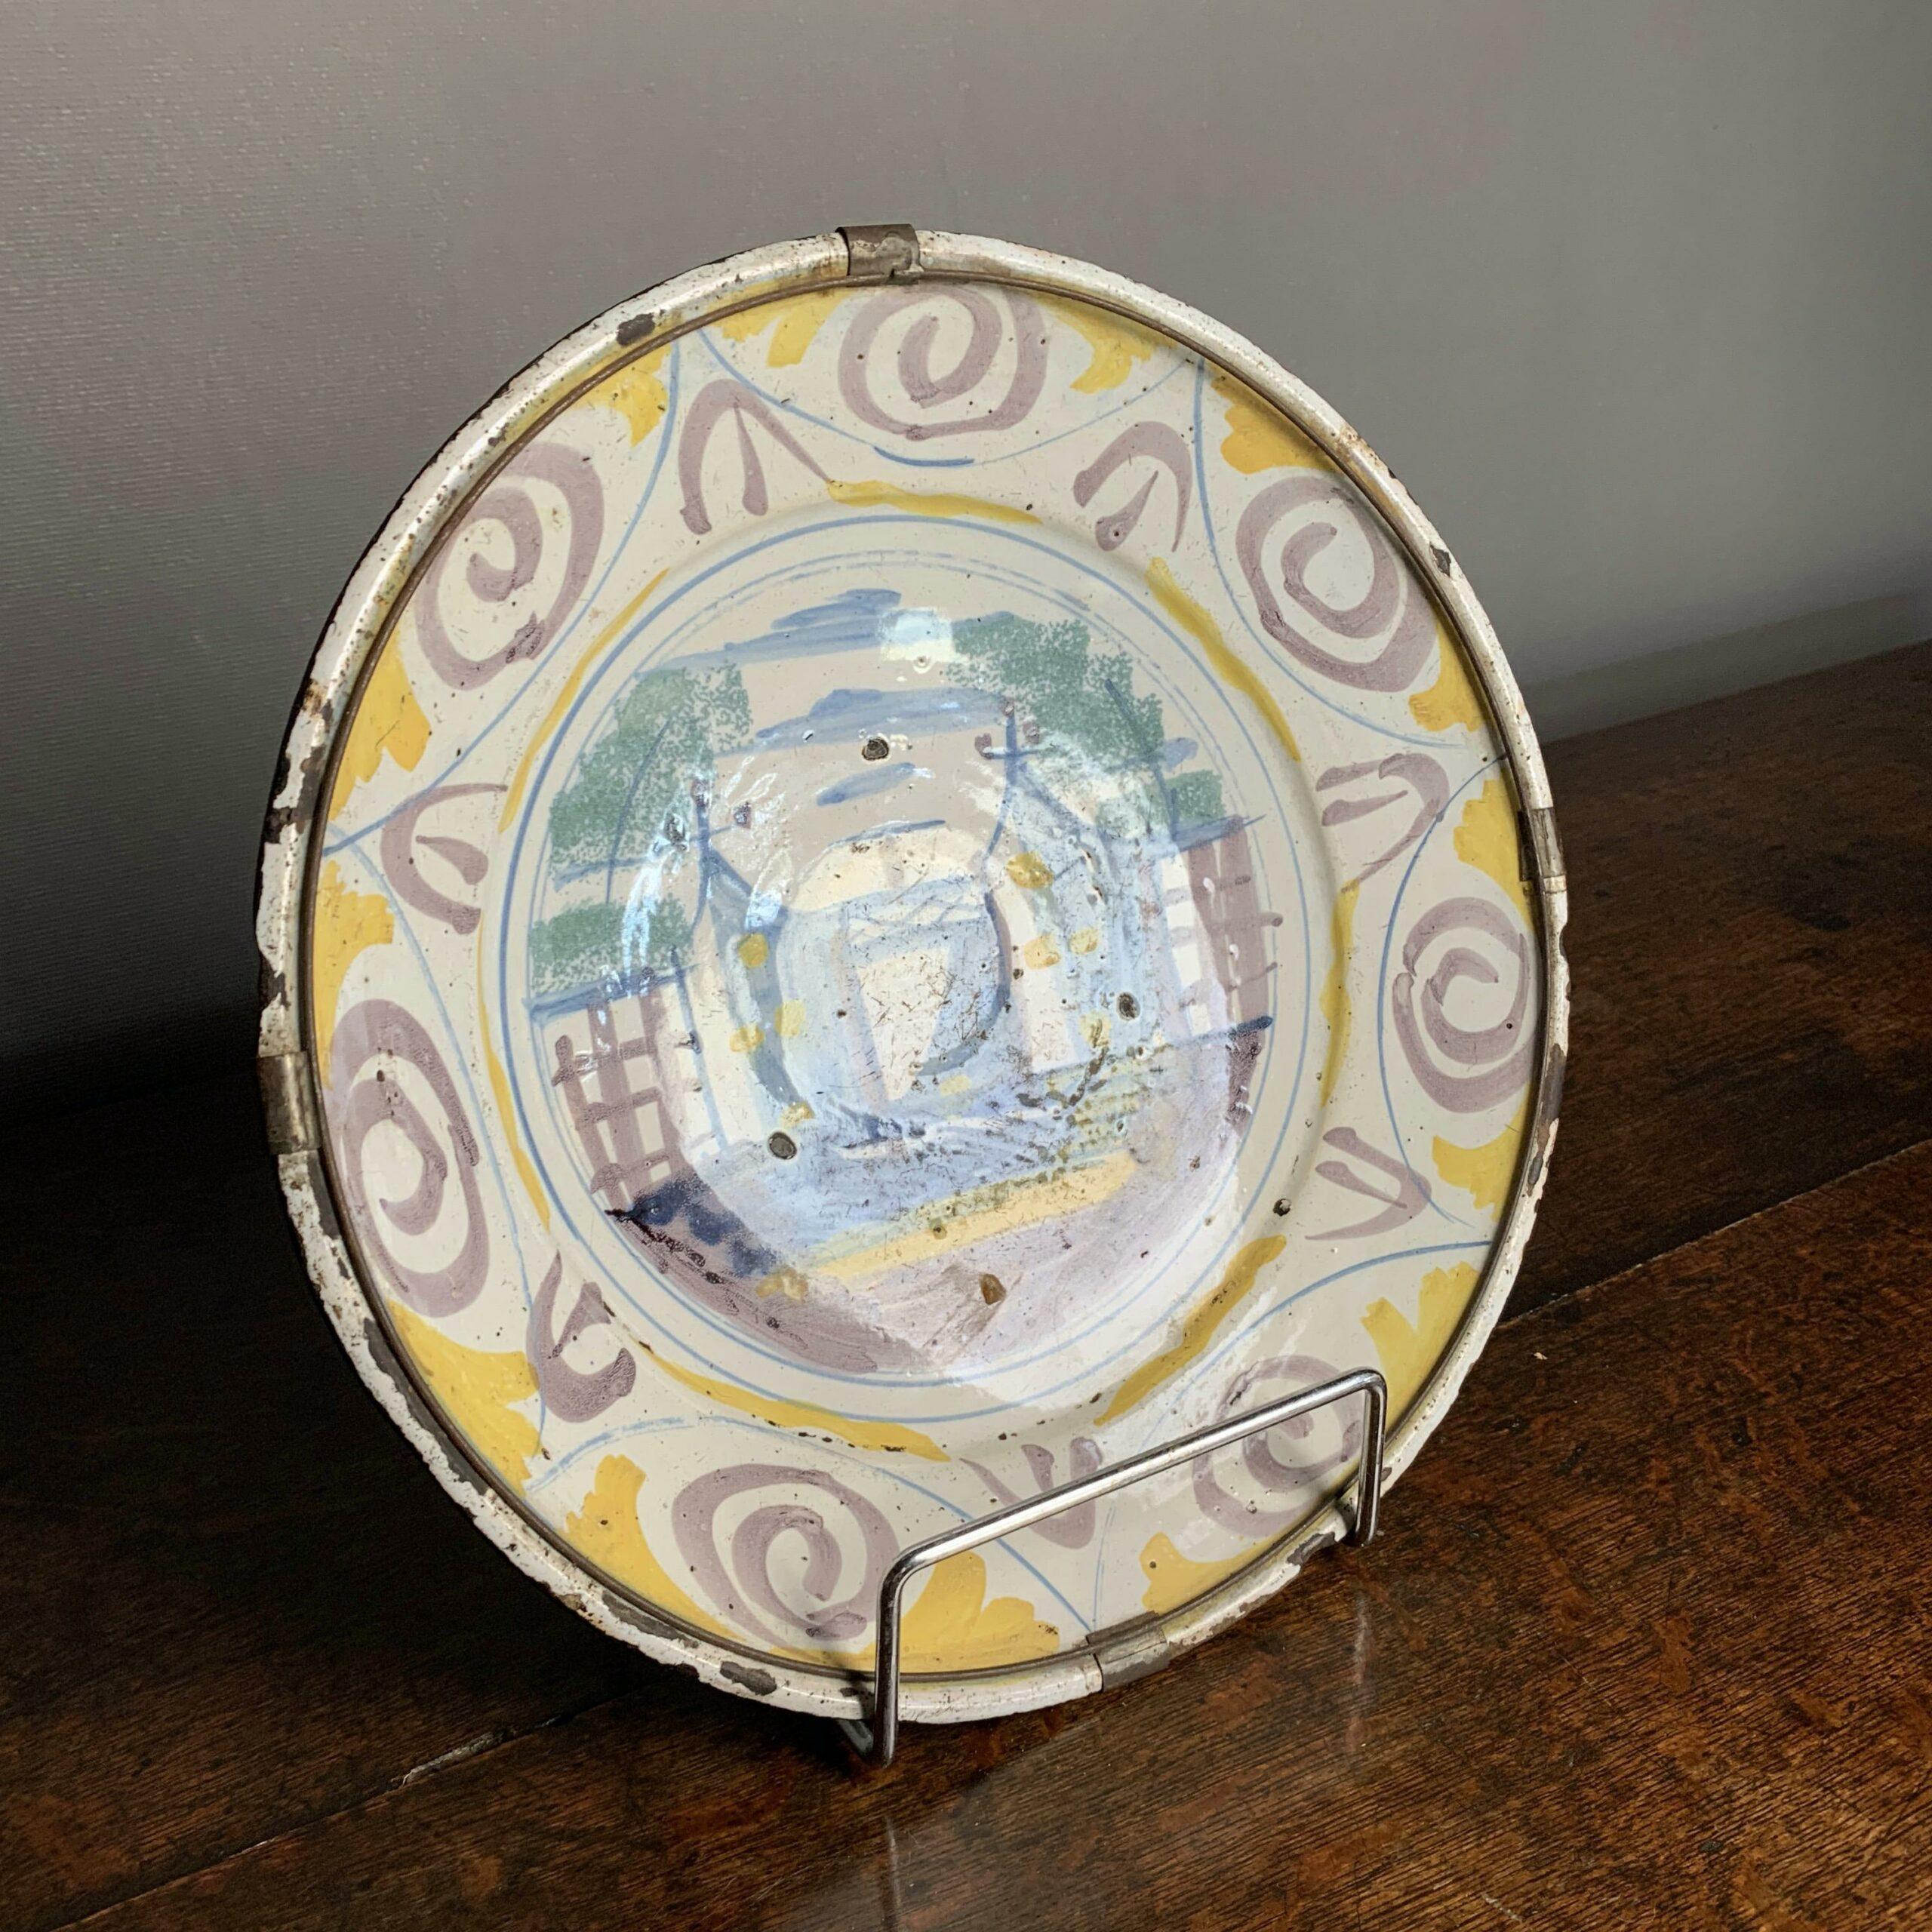 Spanish Charger c1700 with building decoration in the centre and outer decorated rim. Old hanging retained on the back.

Diameter: 30 cm / 12”